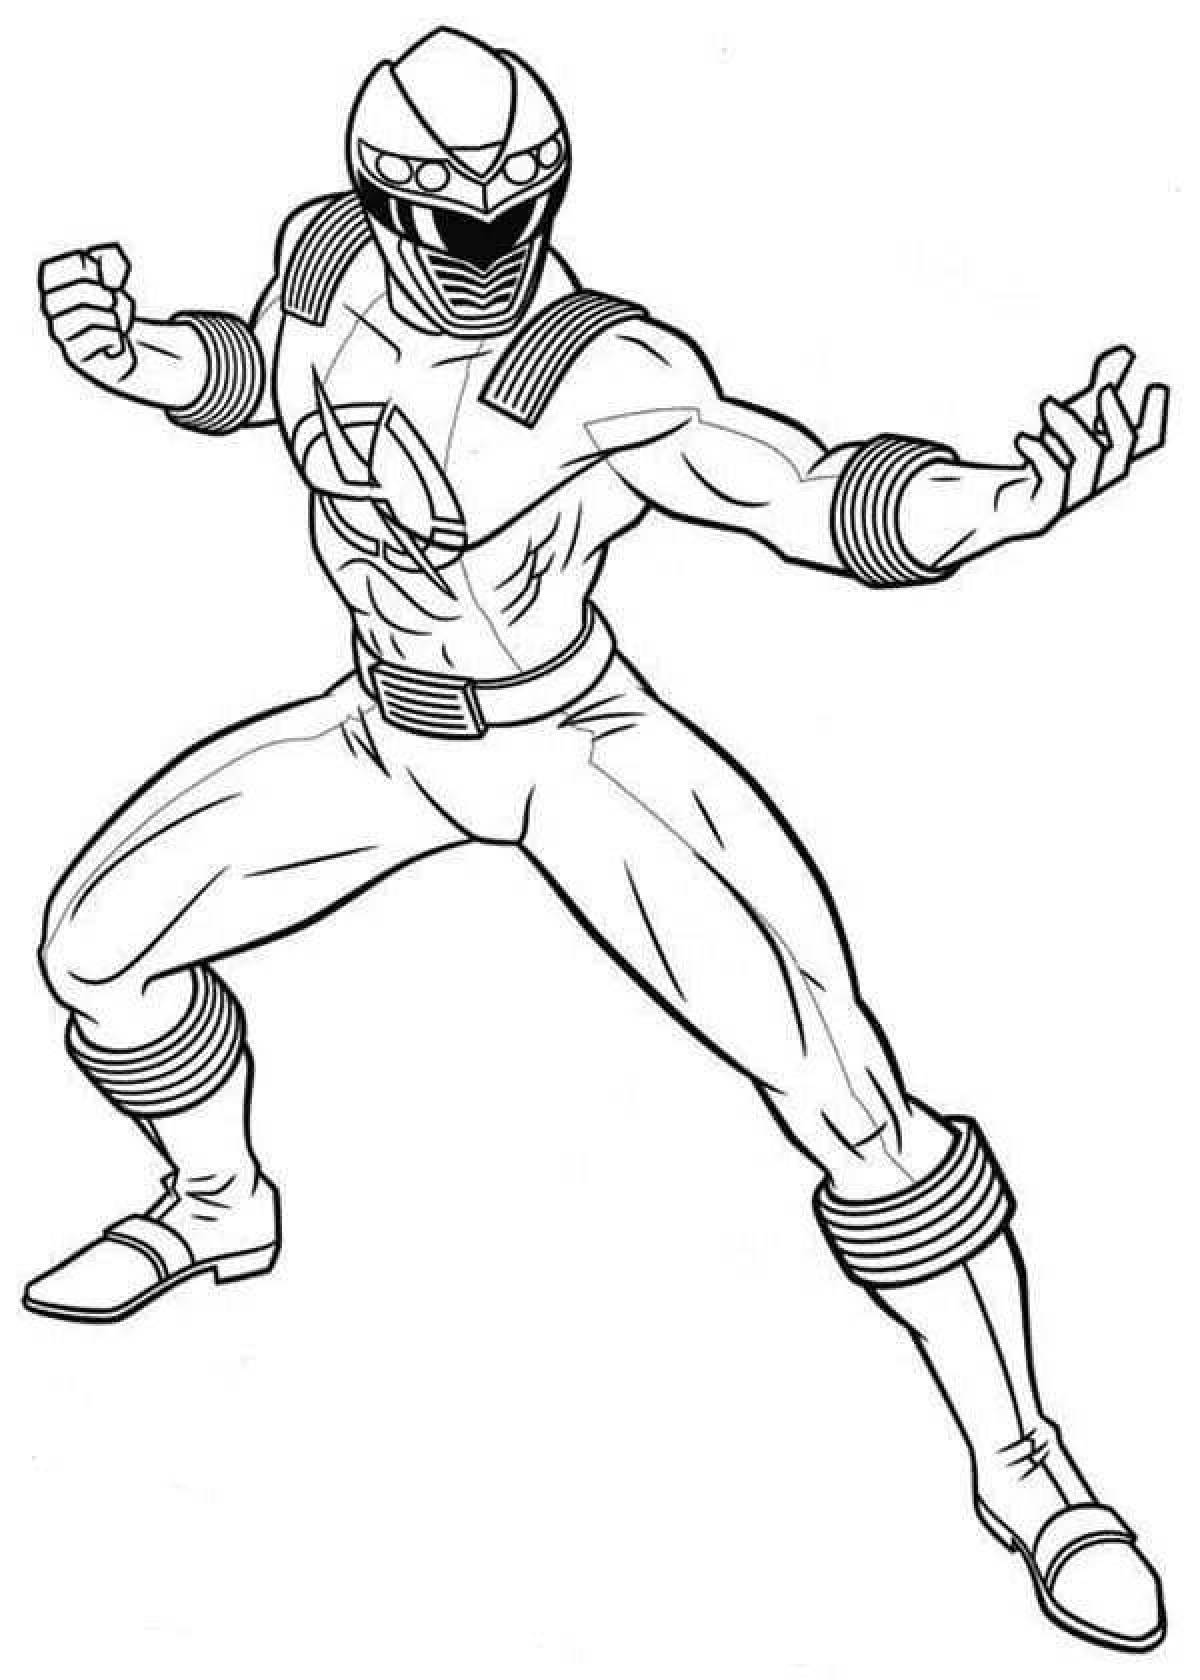 Coloring page amazing power rangers